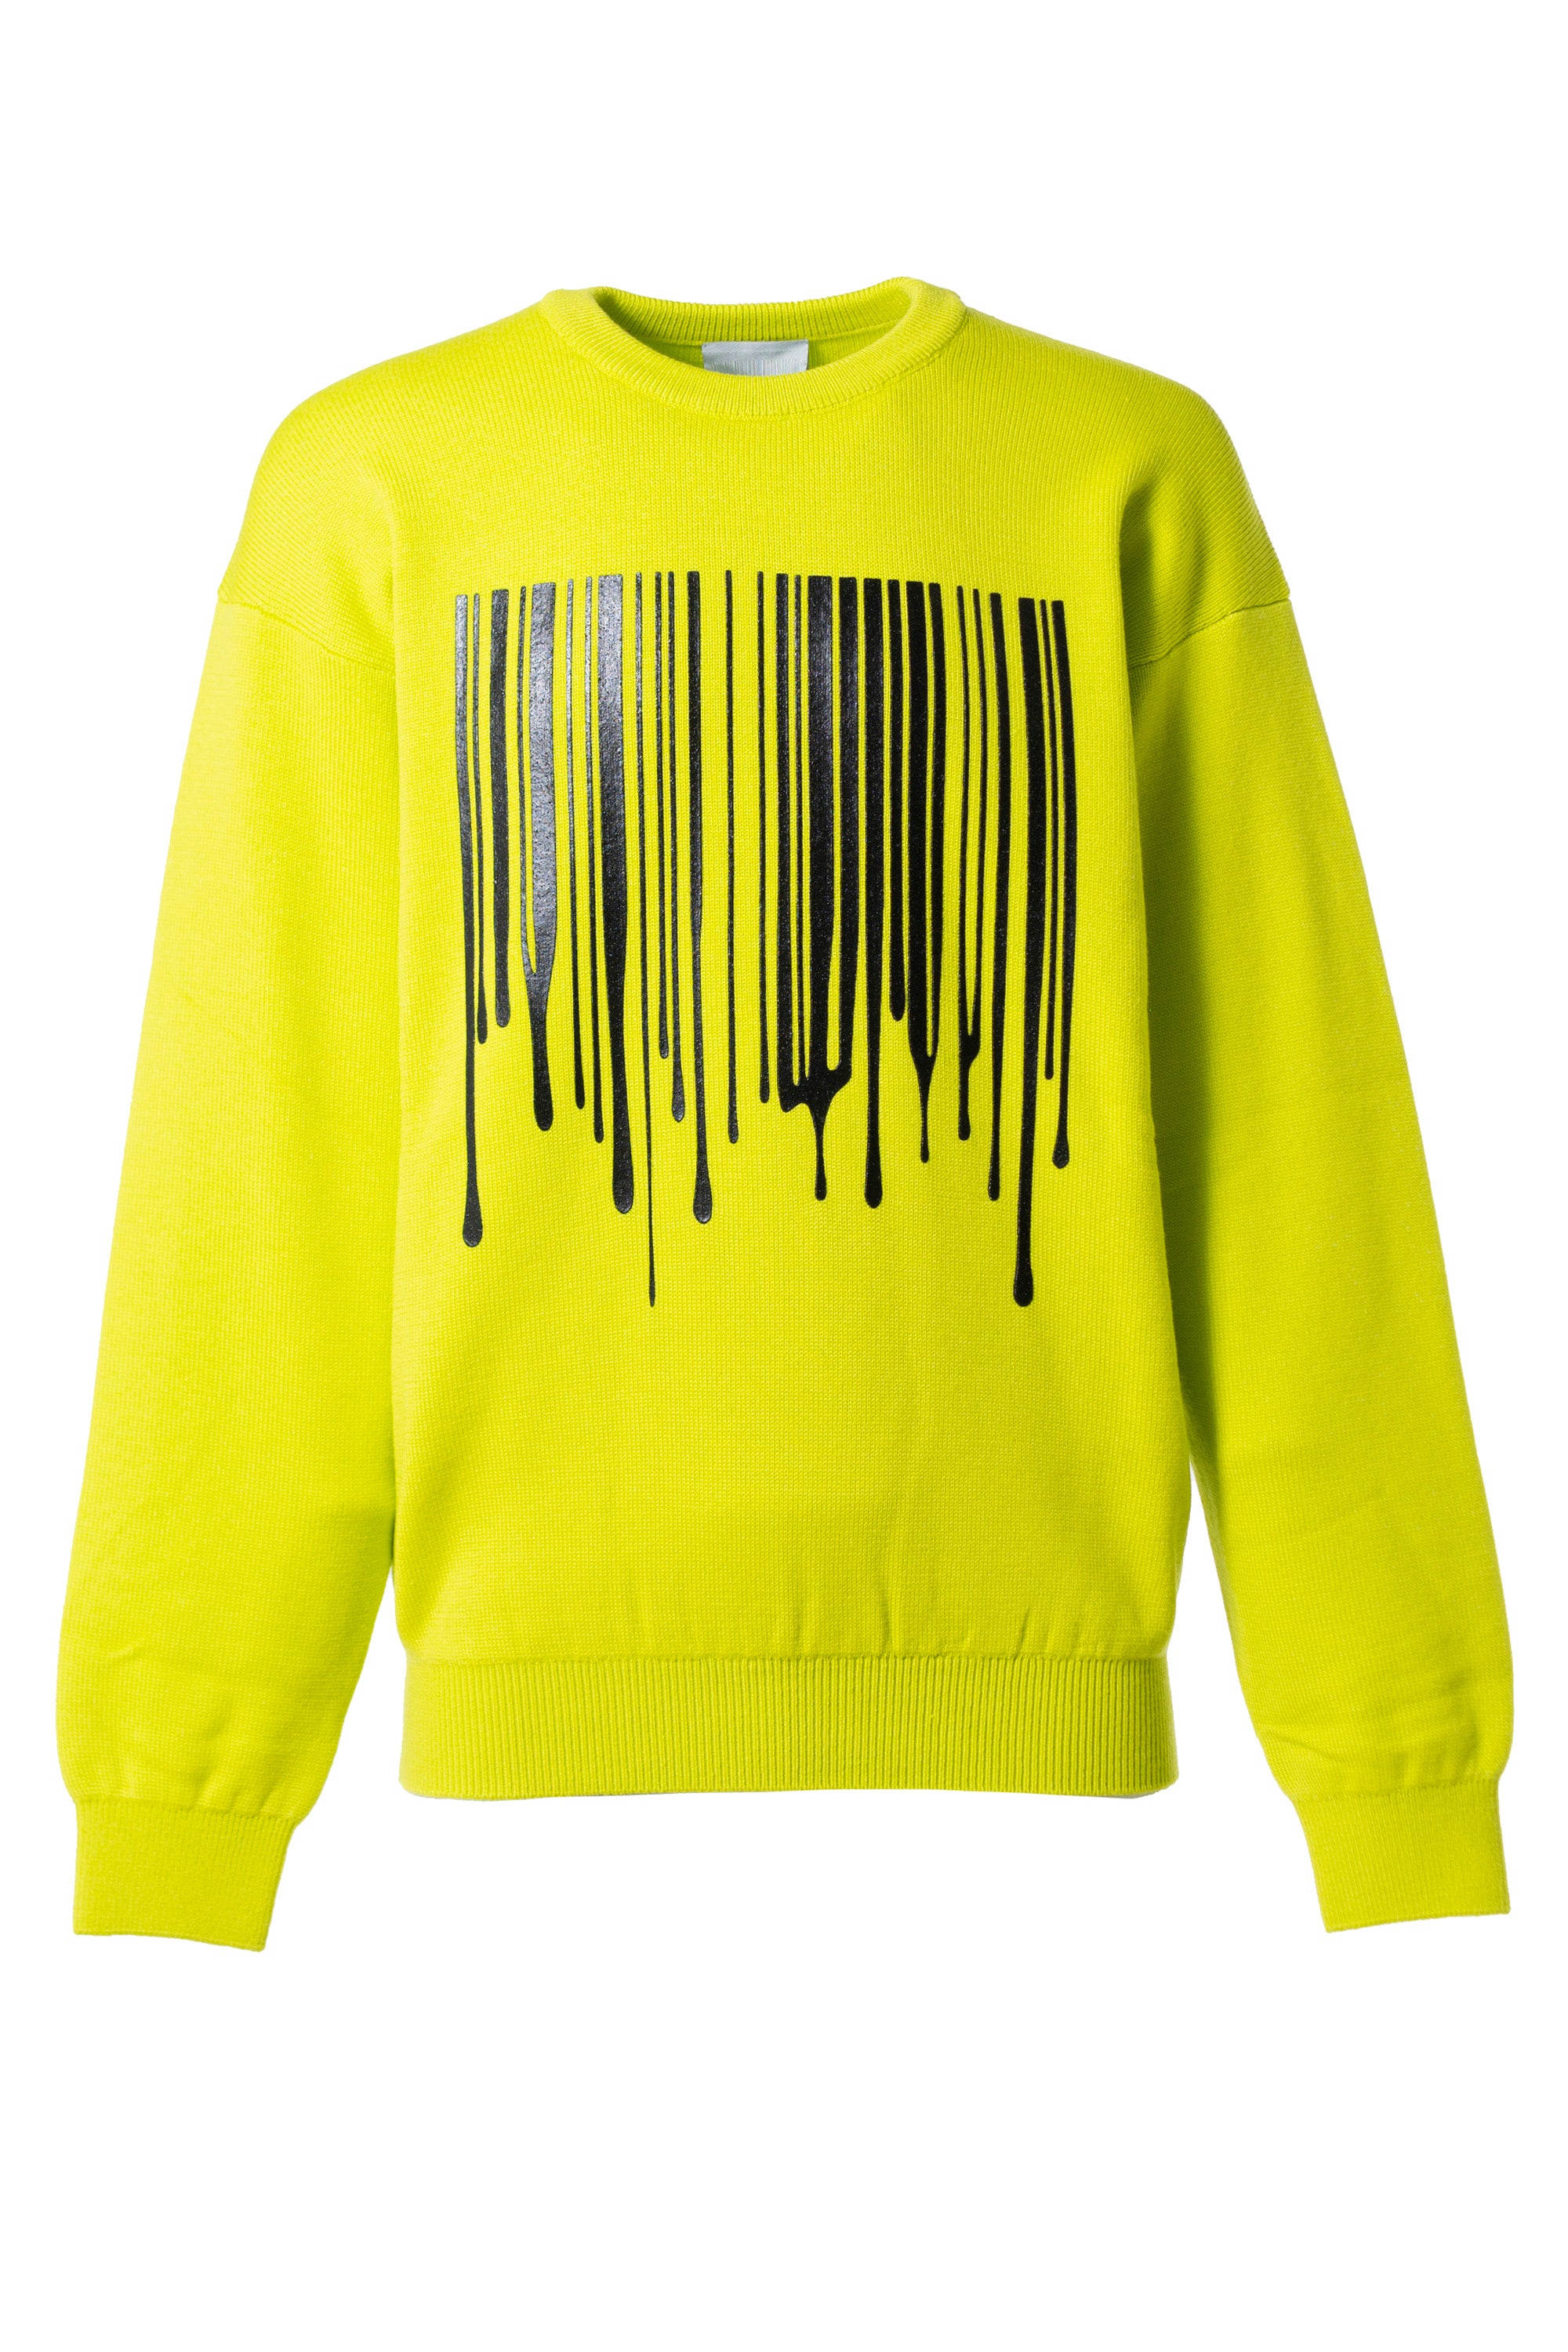 VTMNTS FW22 DRIPPING BARCODE SWEATER / YEL - NUBIAN